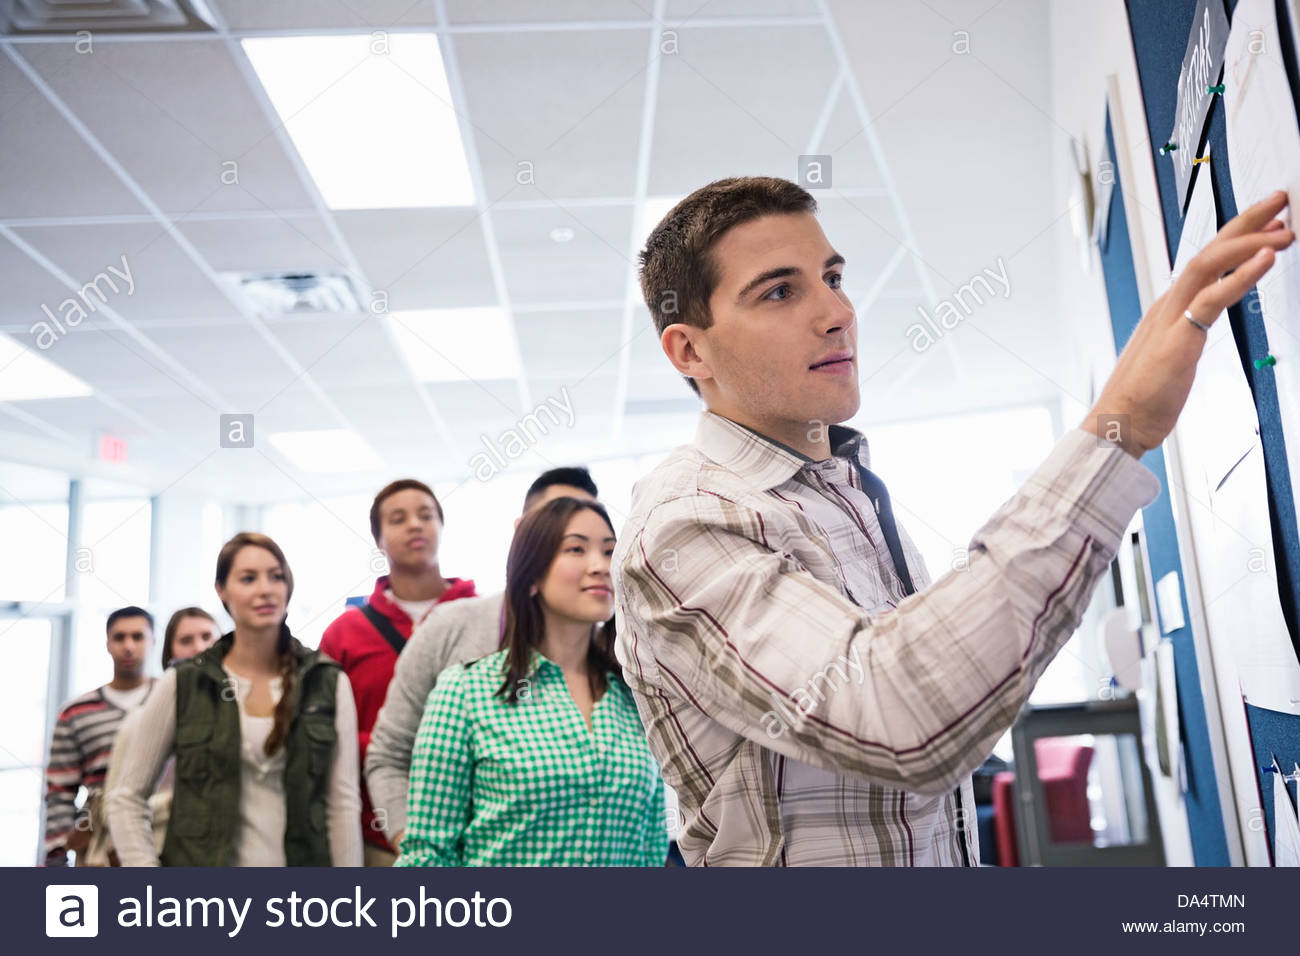 Group of college students checking grade postings Stock Photo